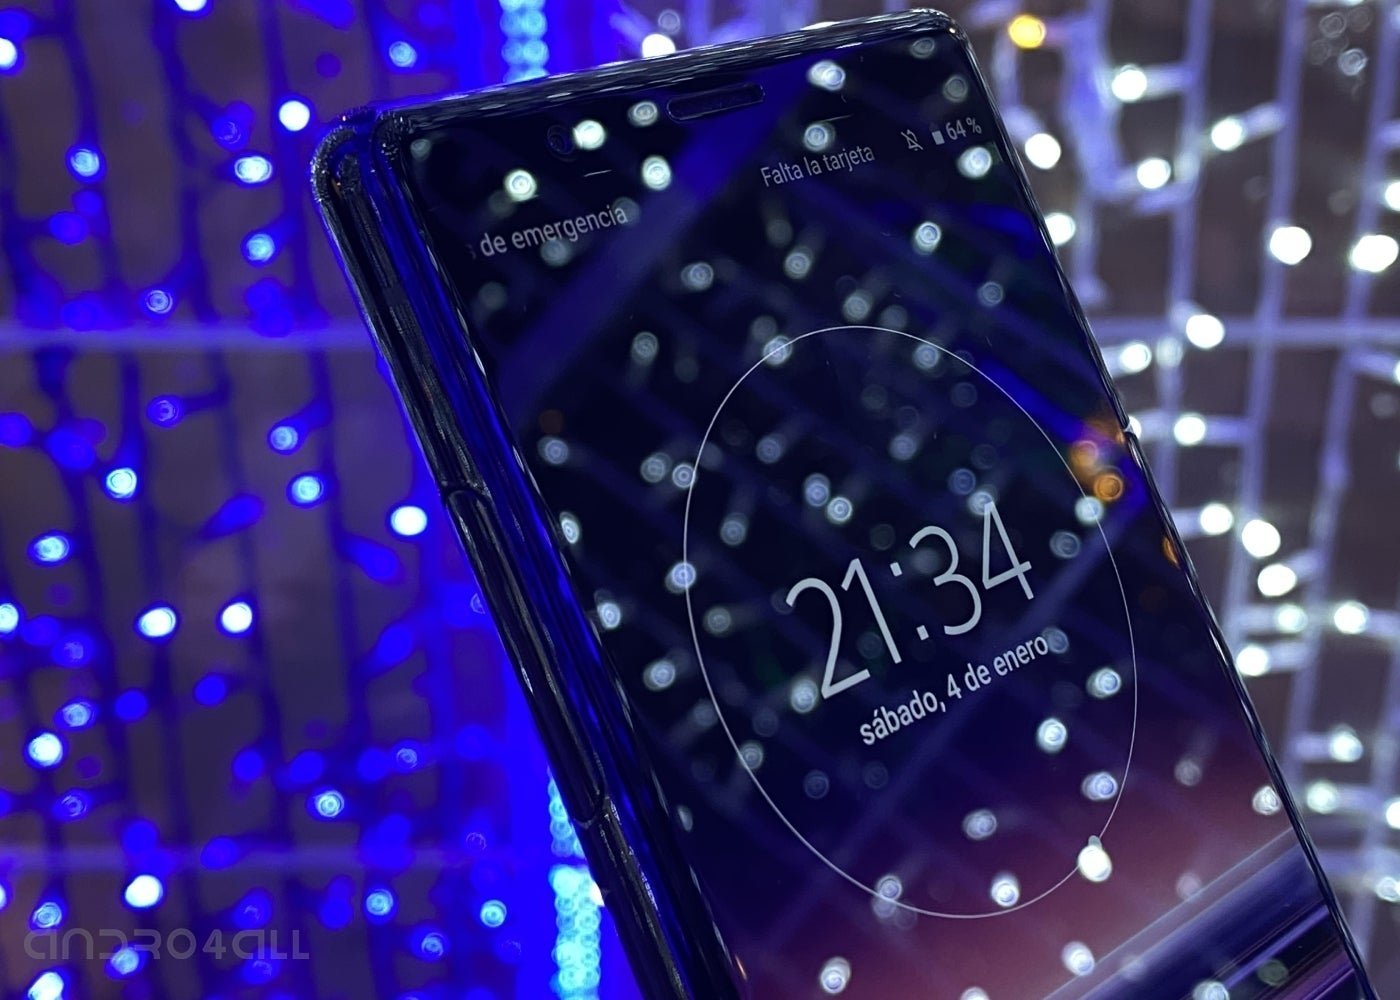 The Sony Xperia 5 screen surrounded by lights